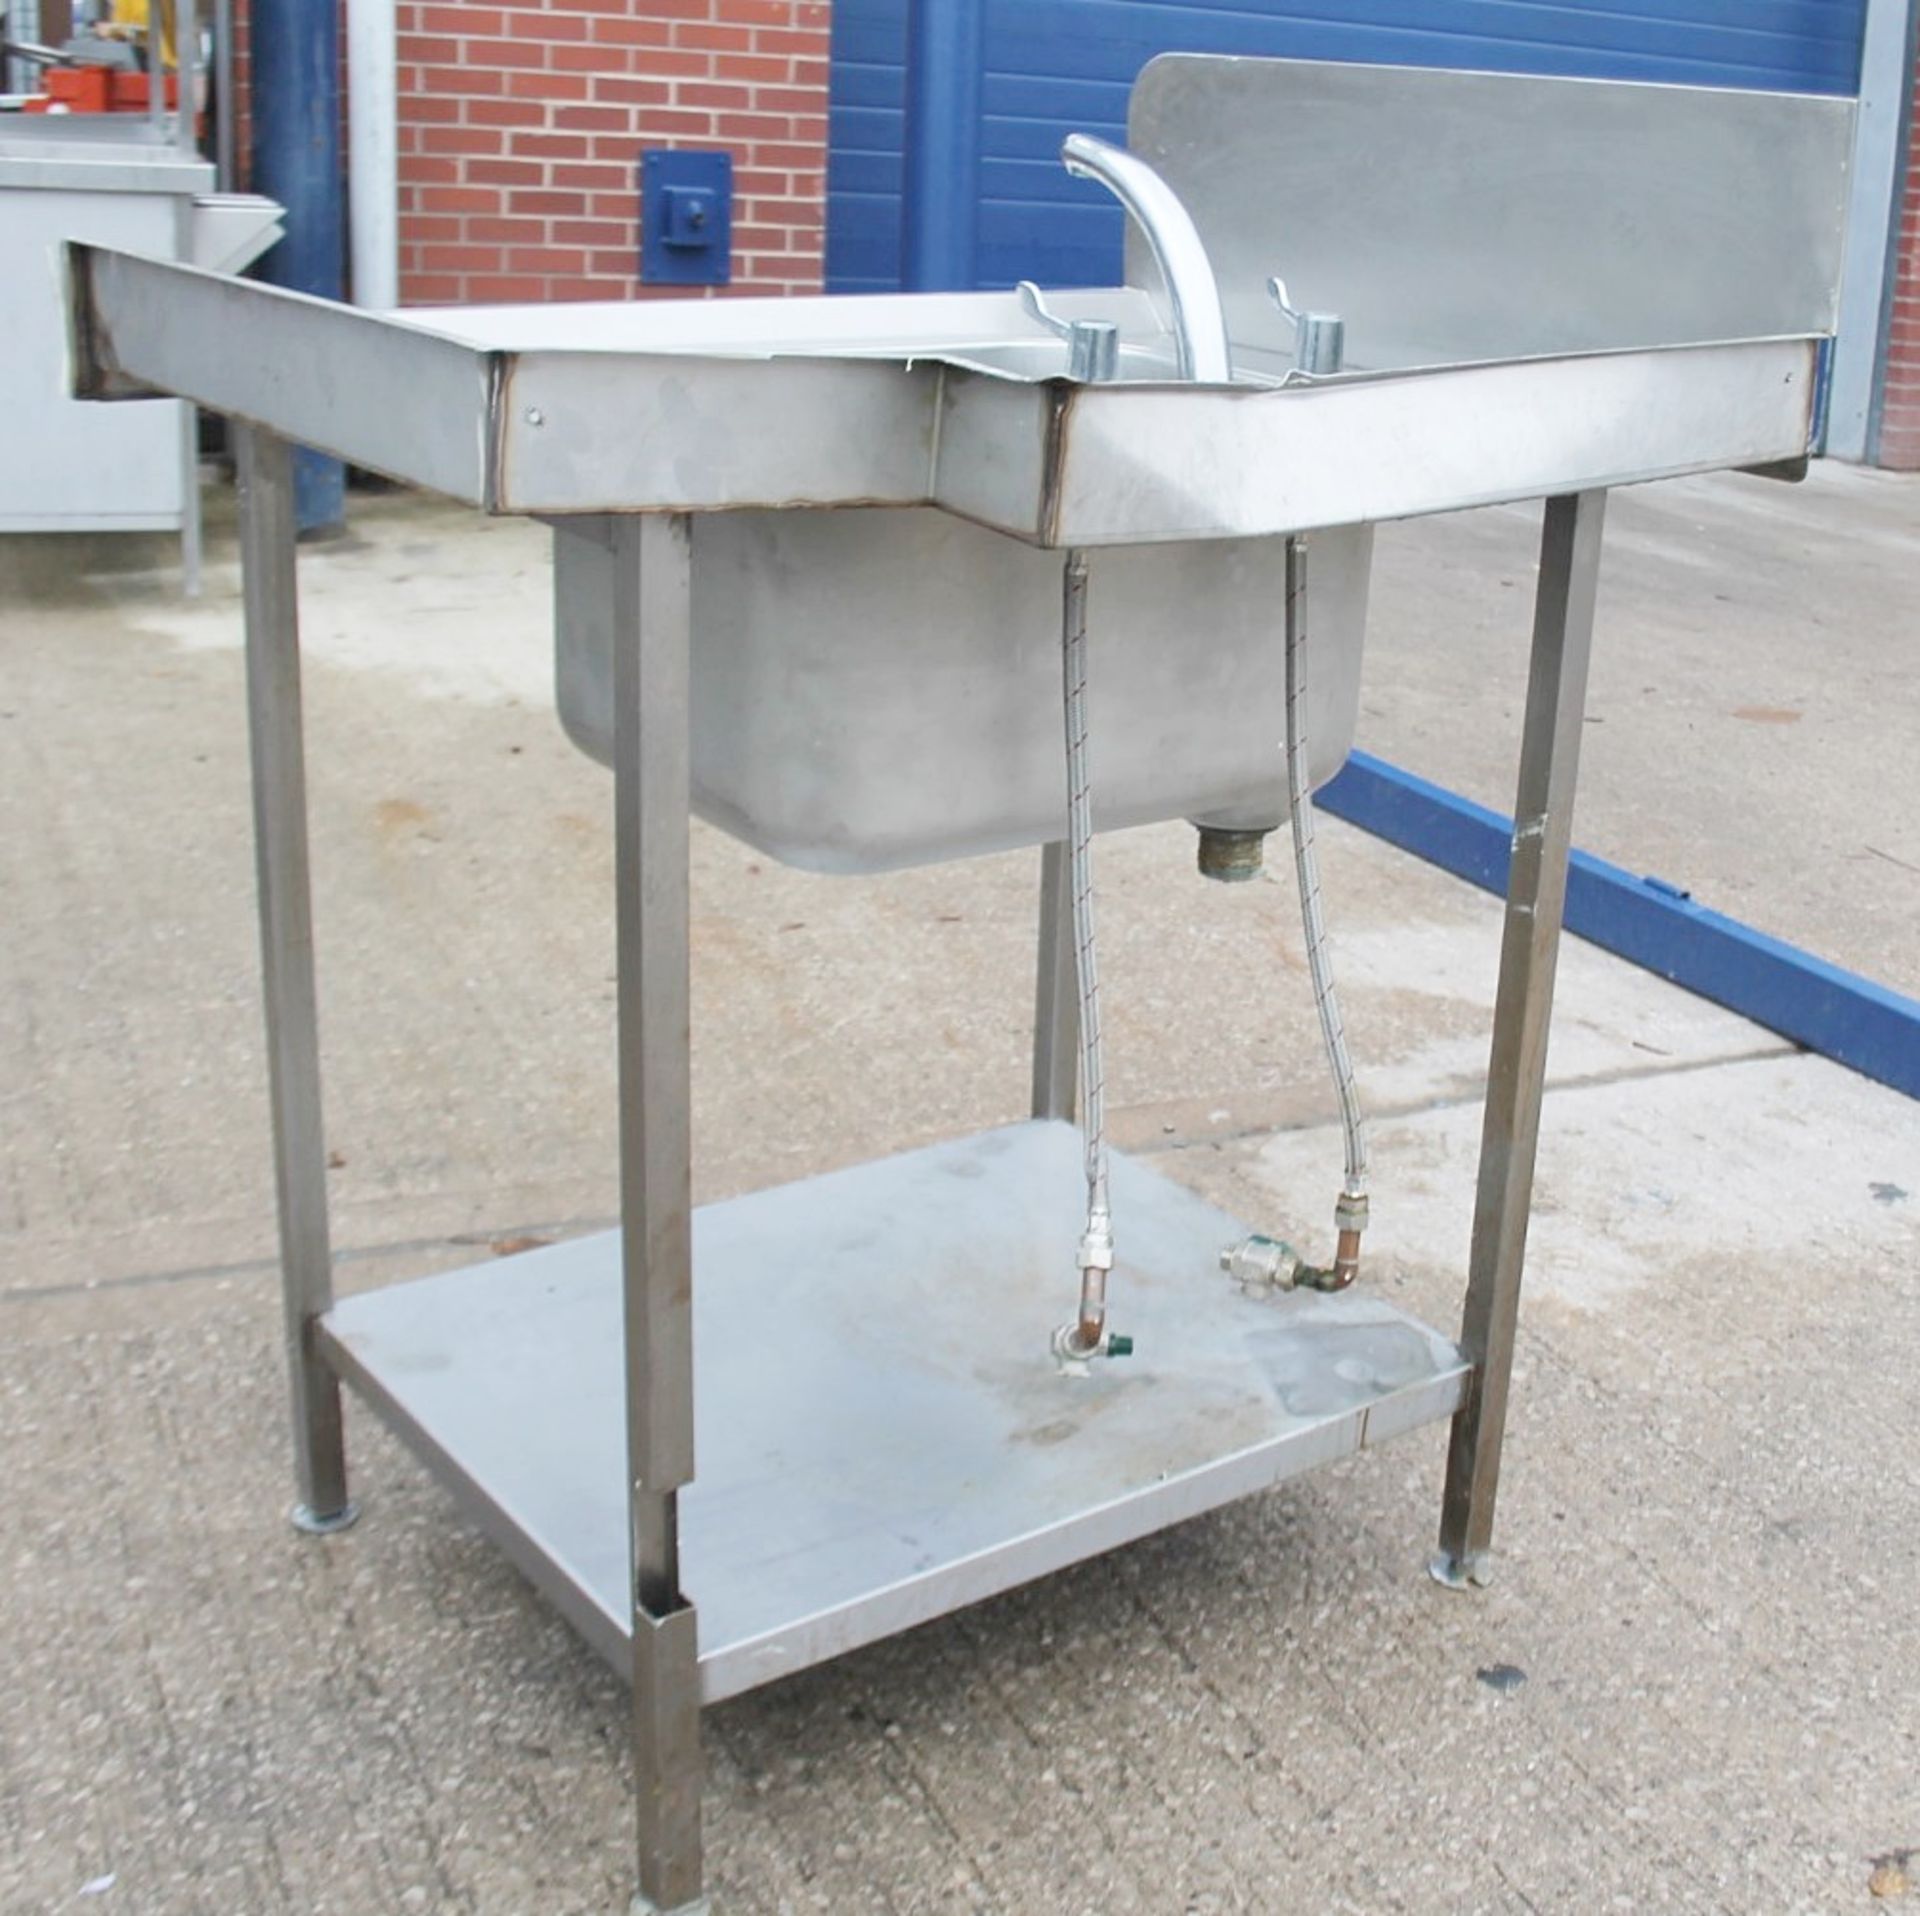 1 x Stainless Steel Commercial Wash Station / Sink Unit, With Upstand And Undershelf - Ref: GEN545 - Image 3 of 6